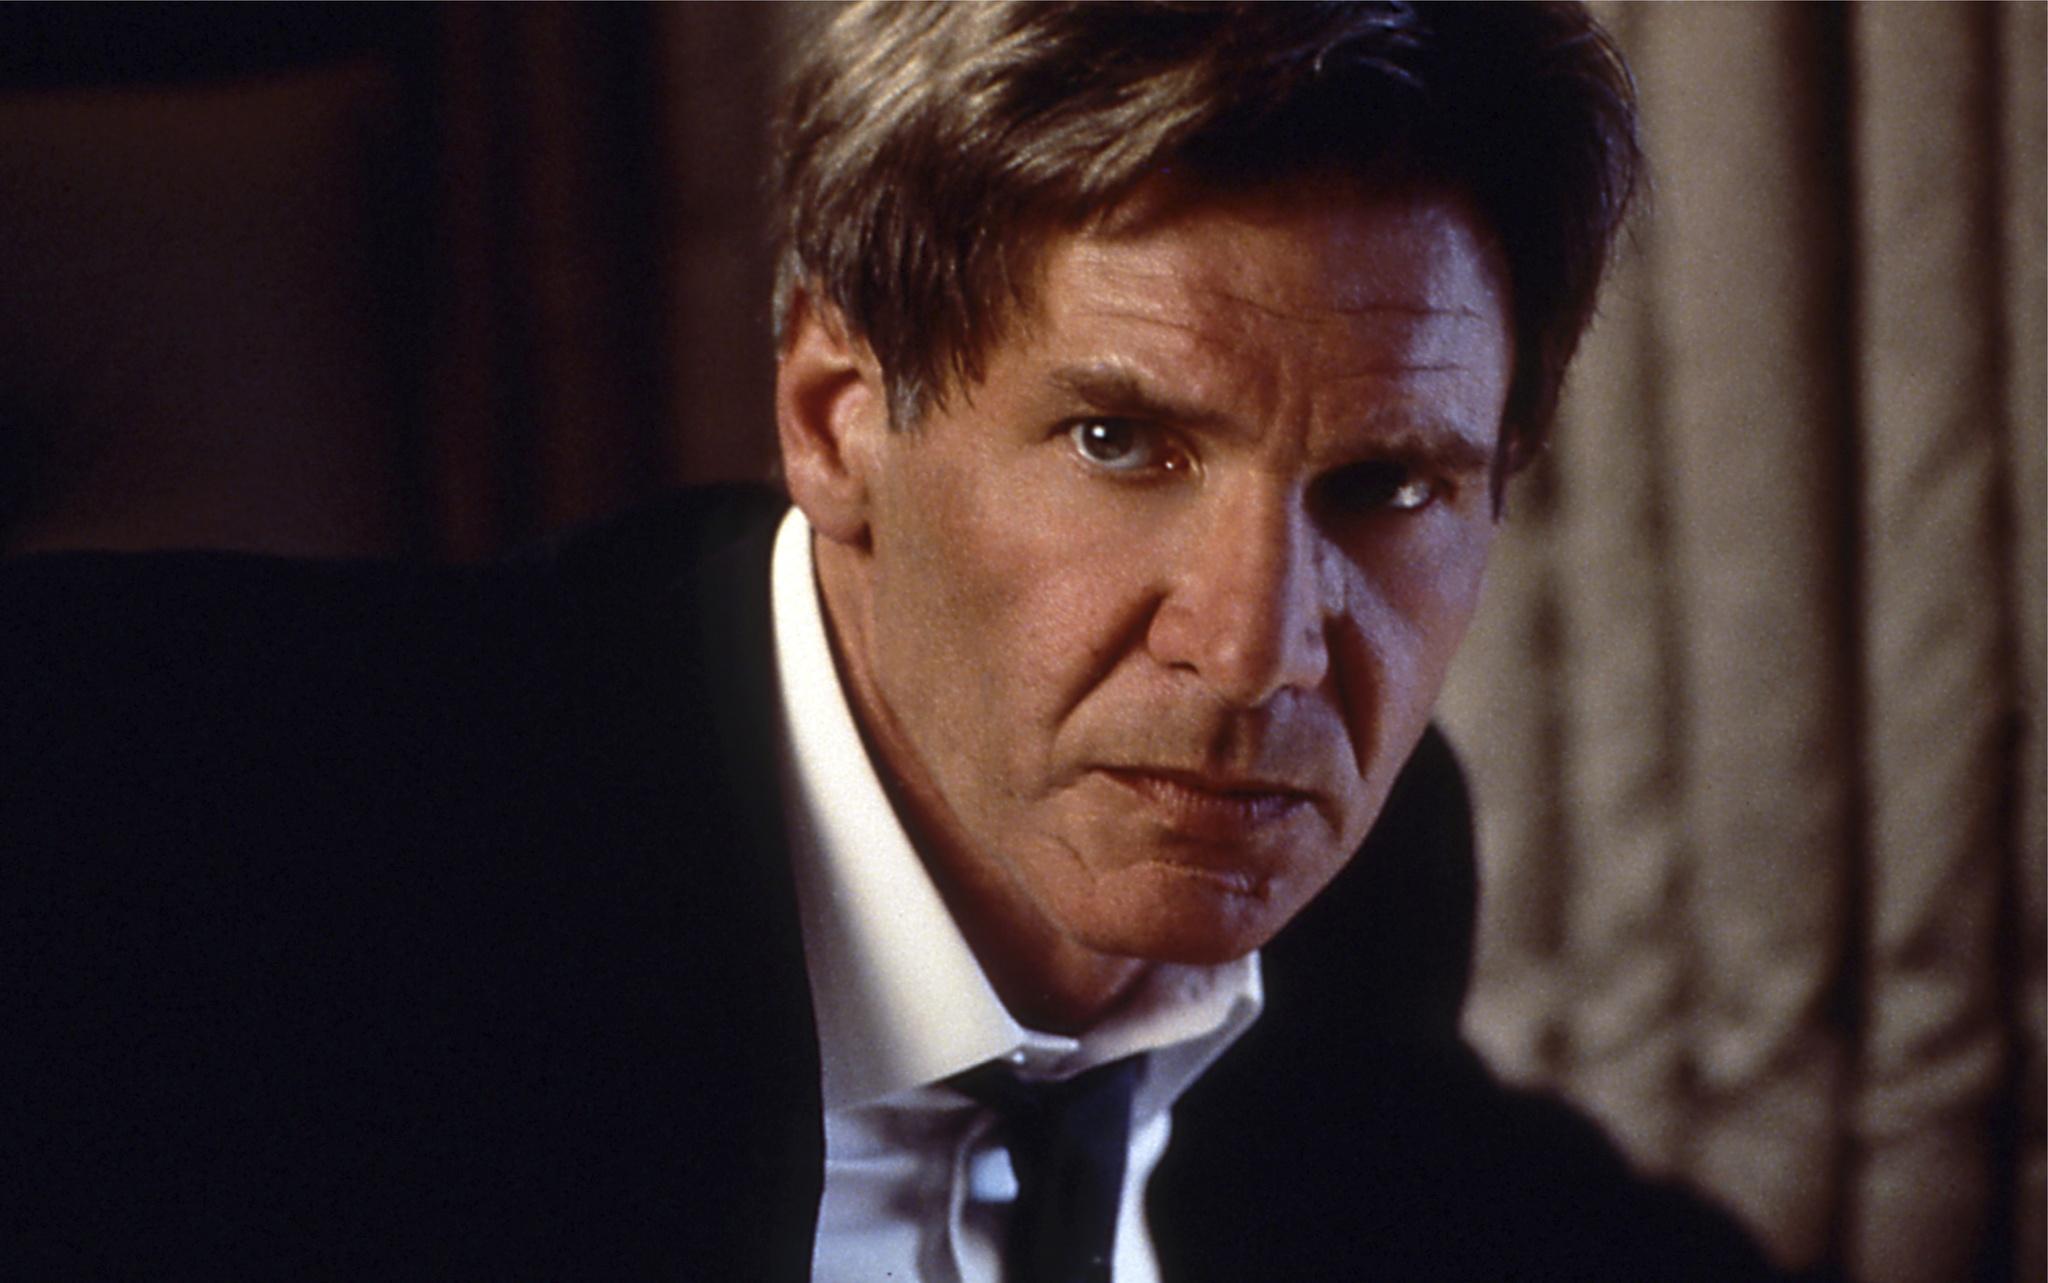 Poll: What is your favorite Harrison Ford performance that isn't Han